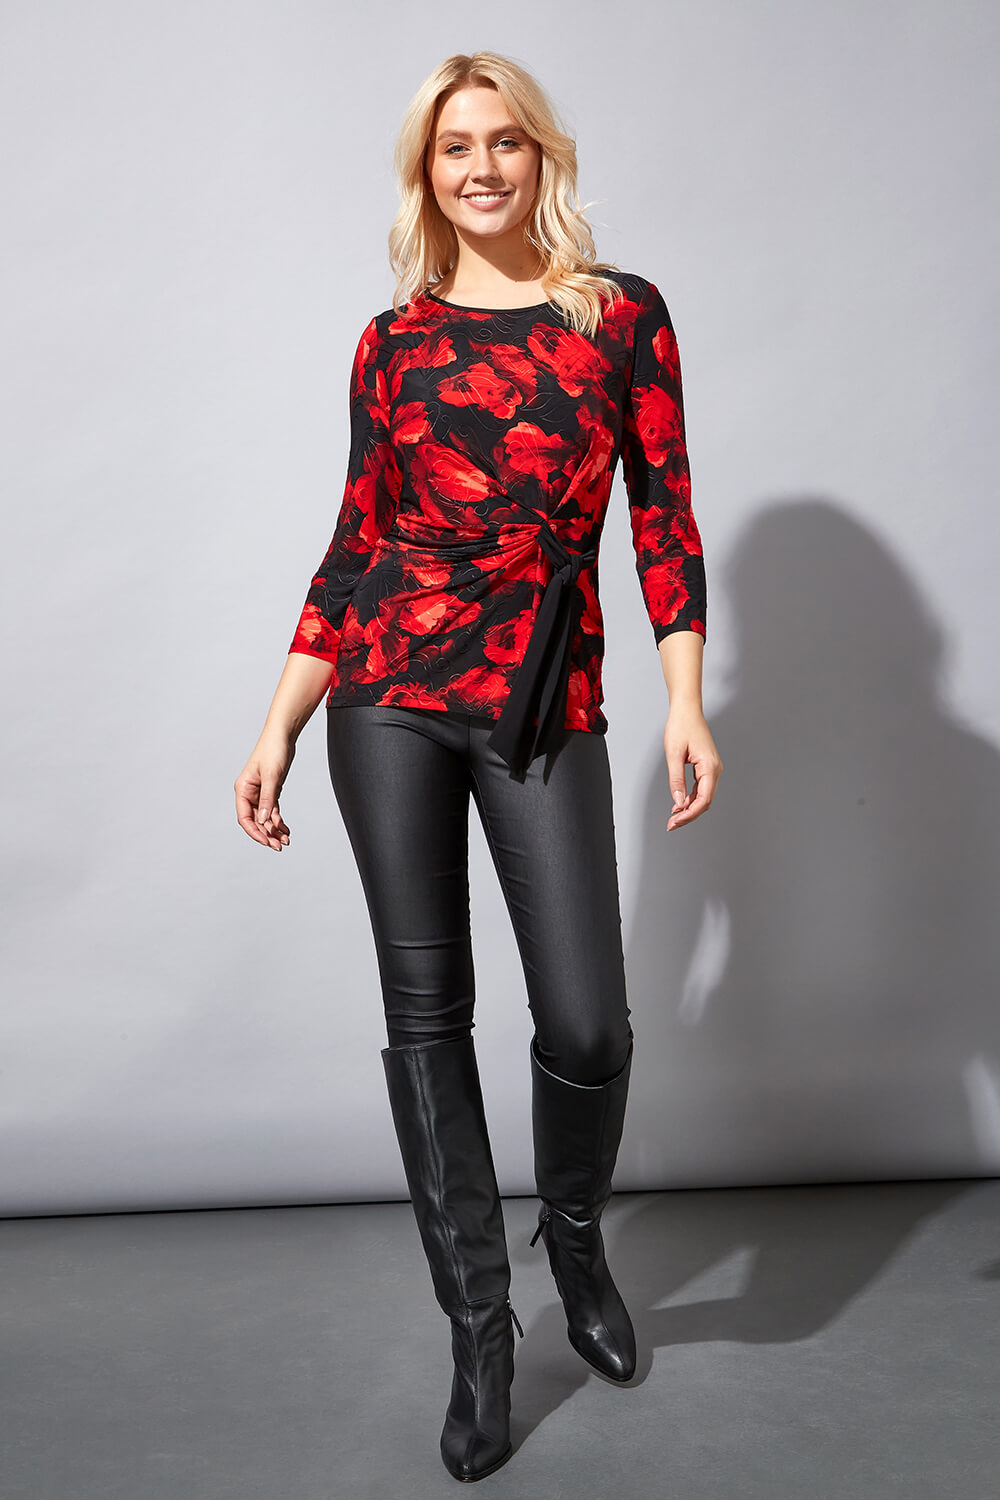 Red Jacquard Floral Side Tie Top, Image 2 of 6